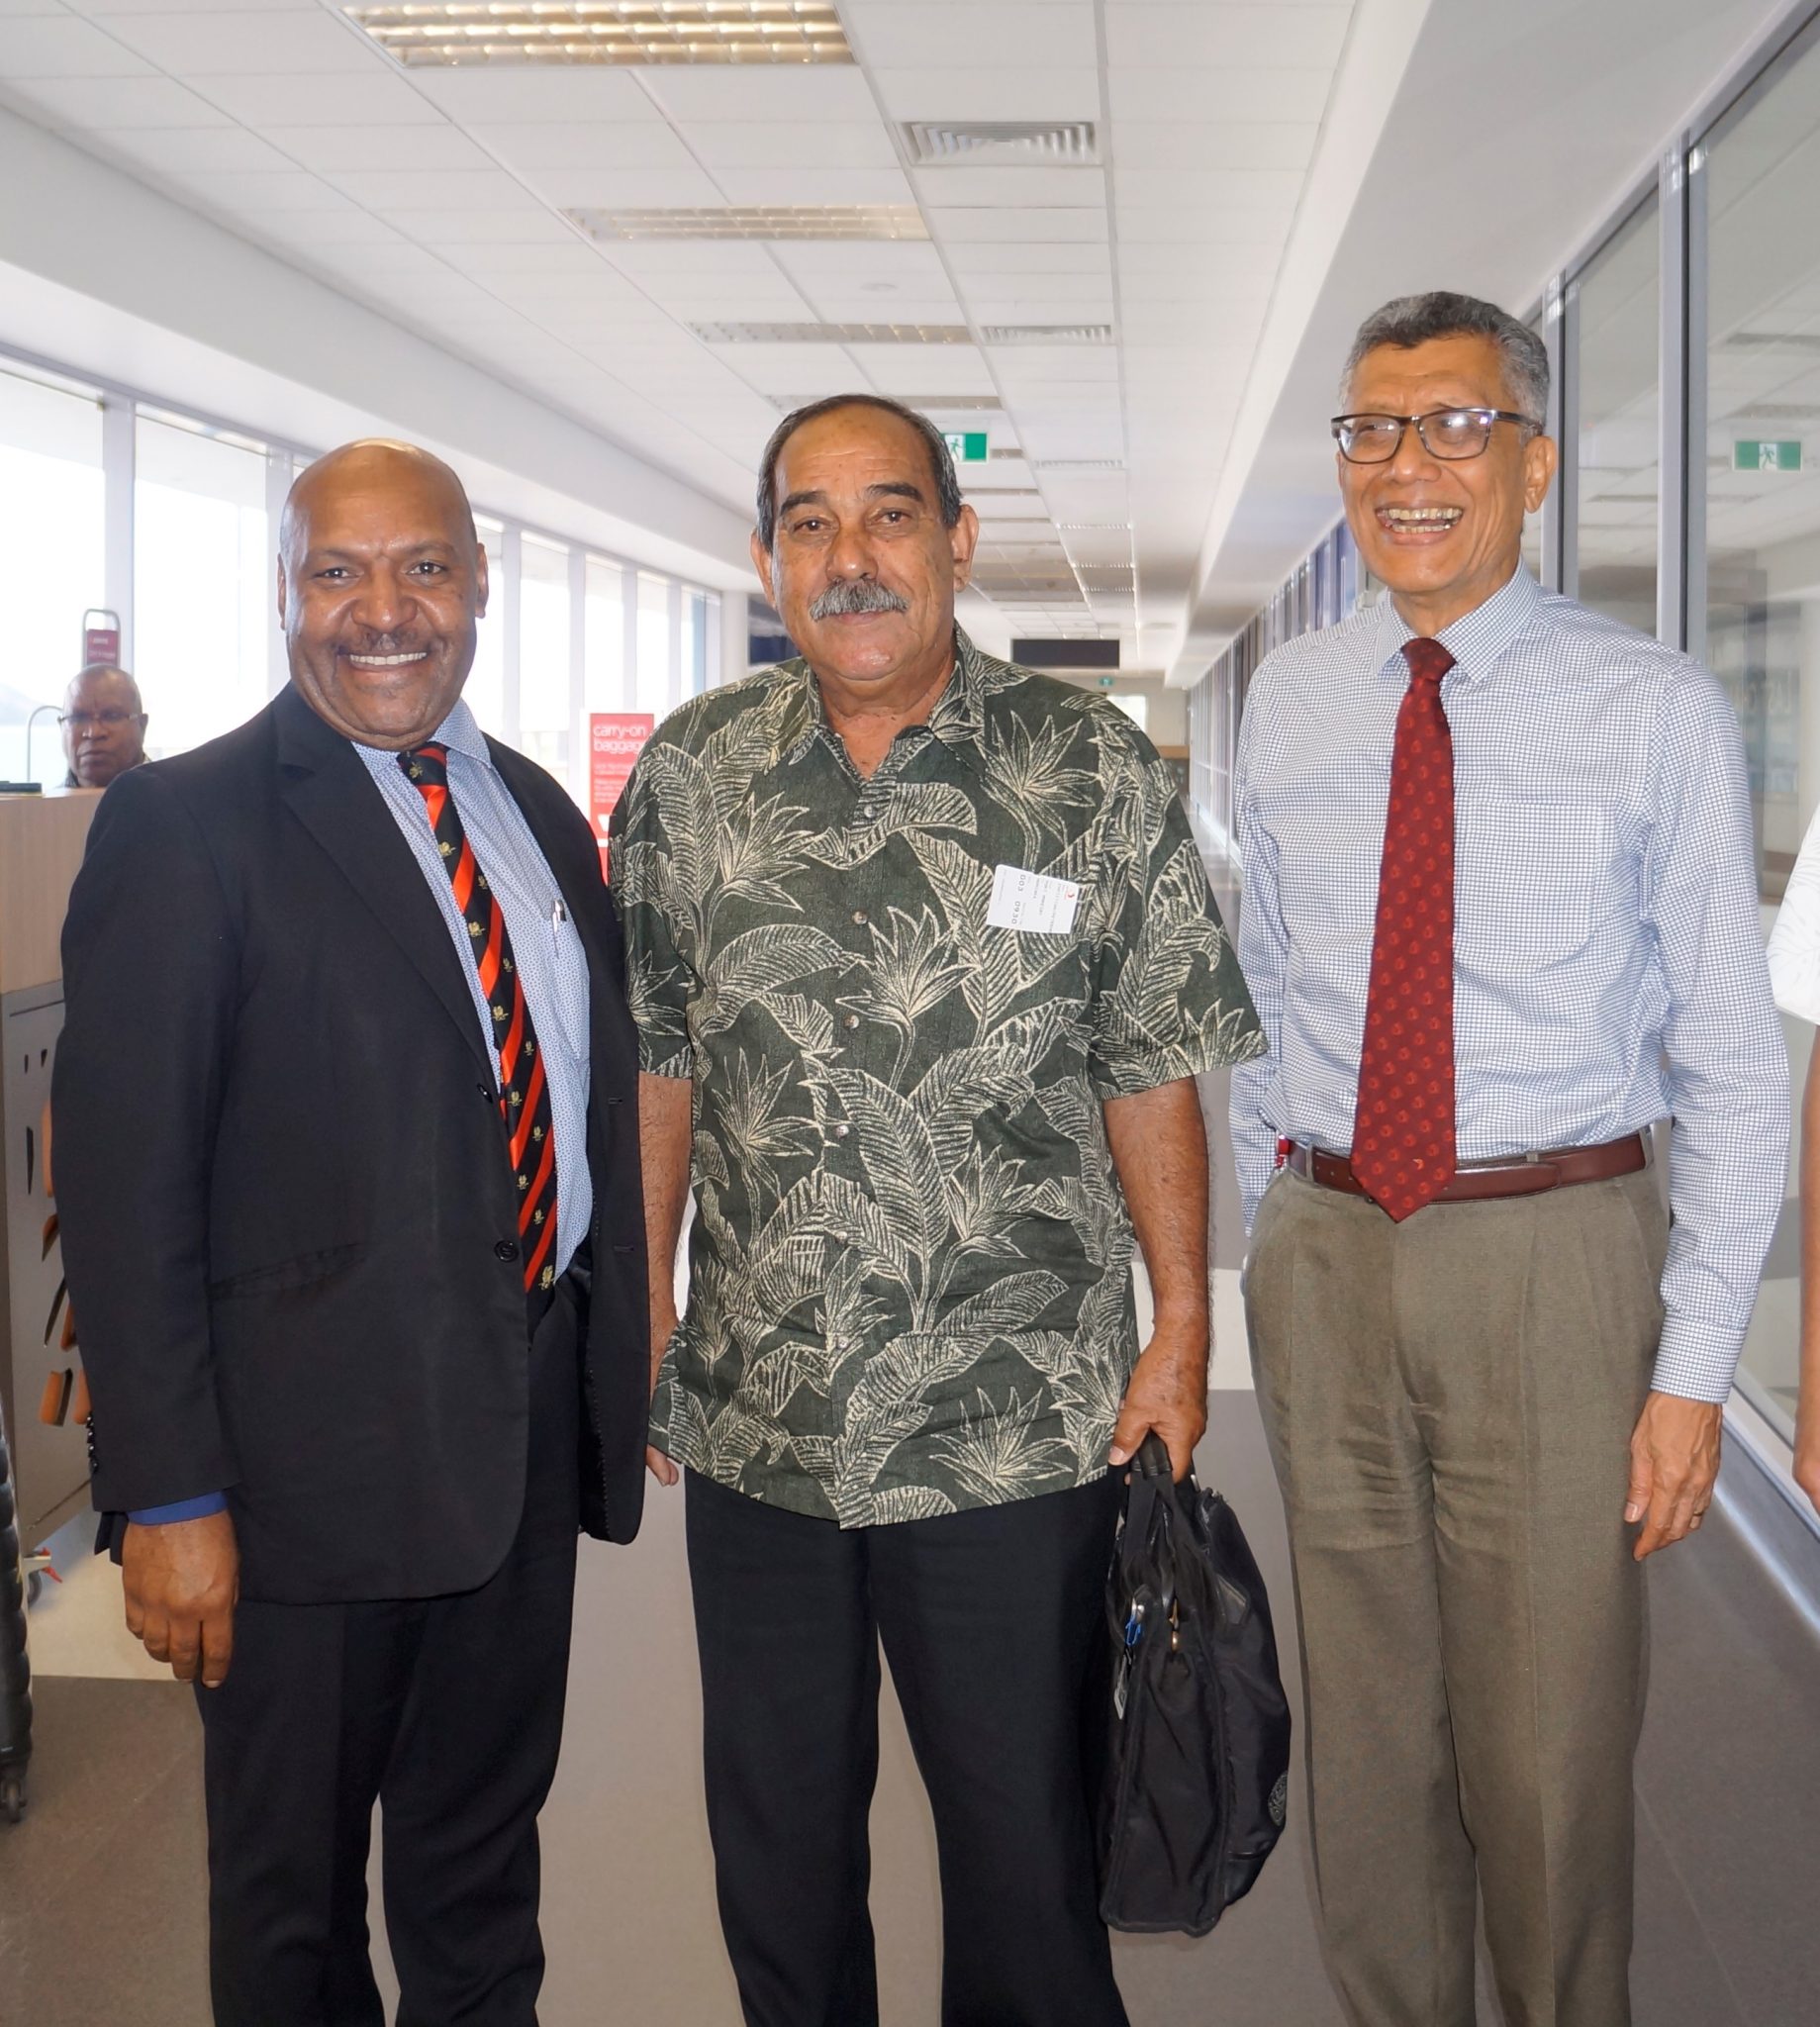 FSM President meets with Heads of Air Niugini & National Airports Corporation